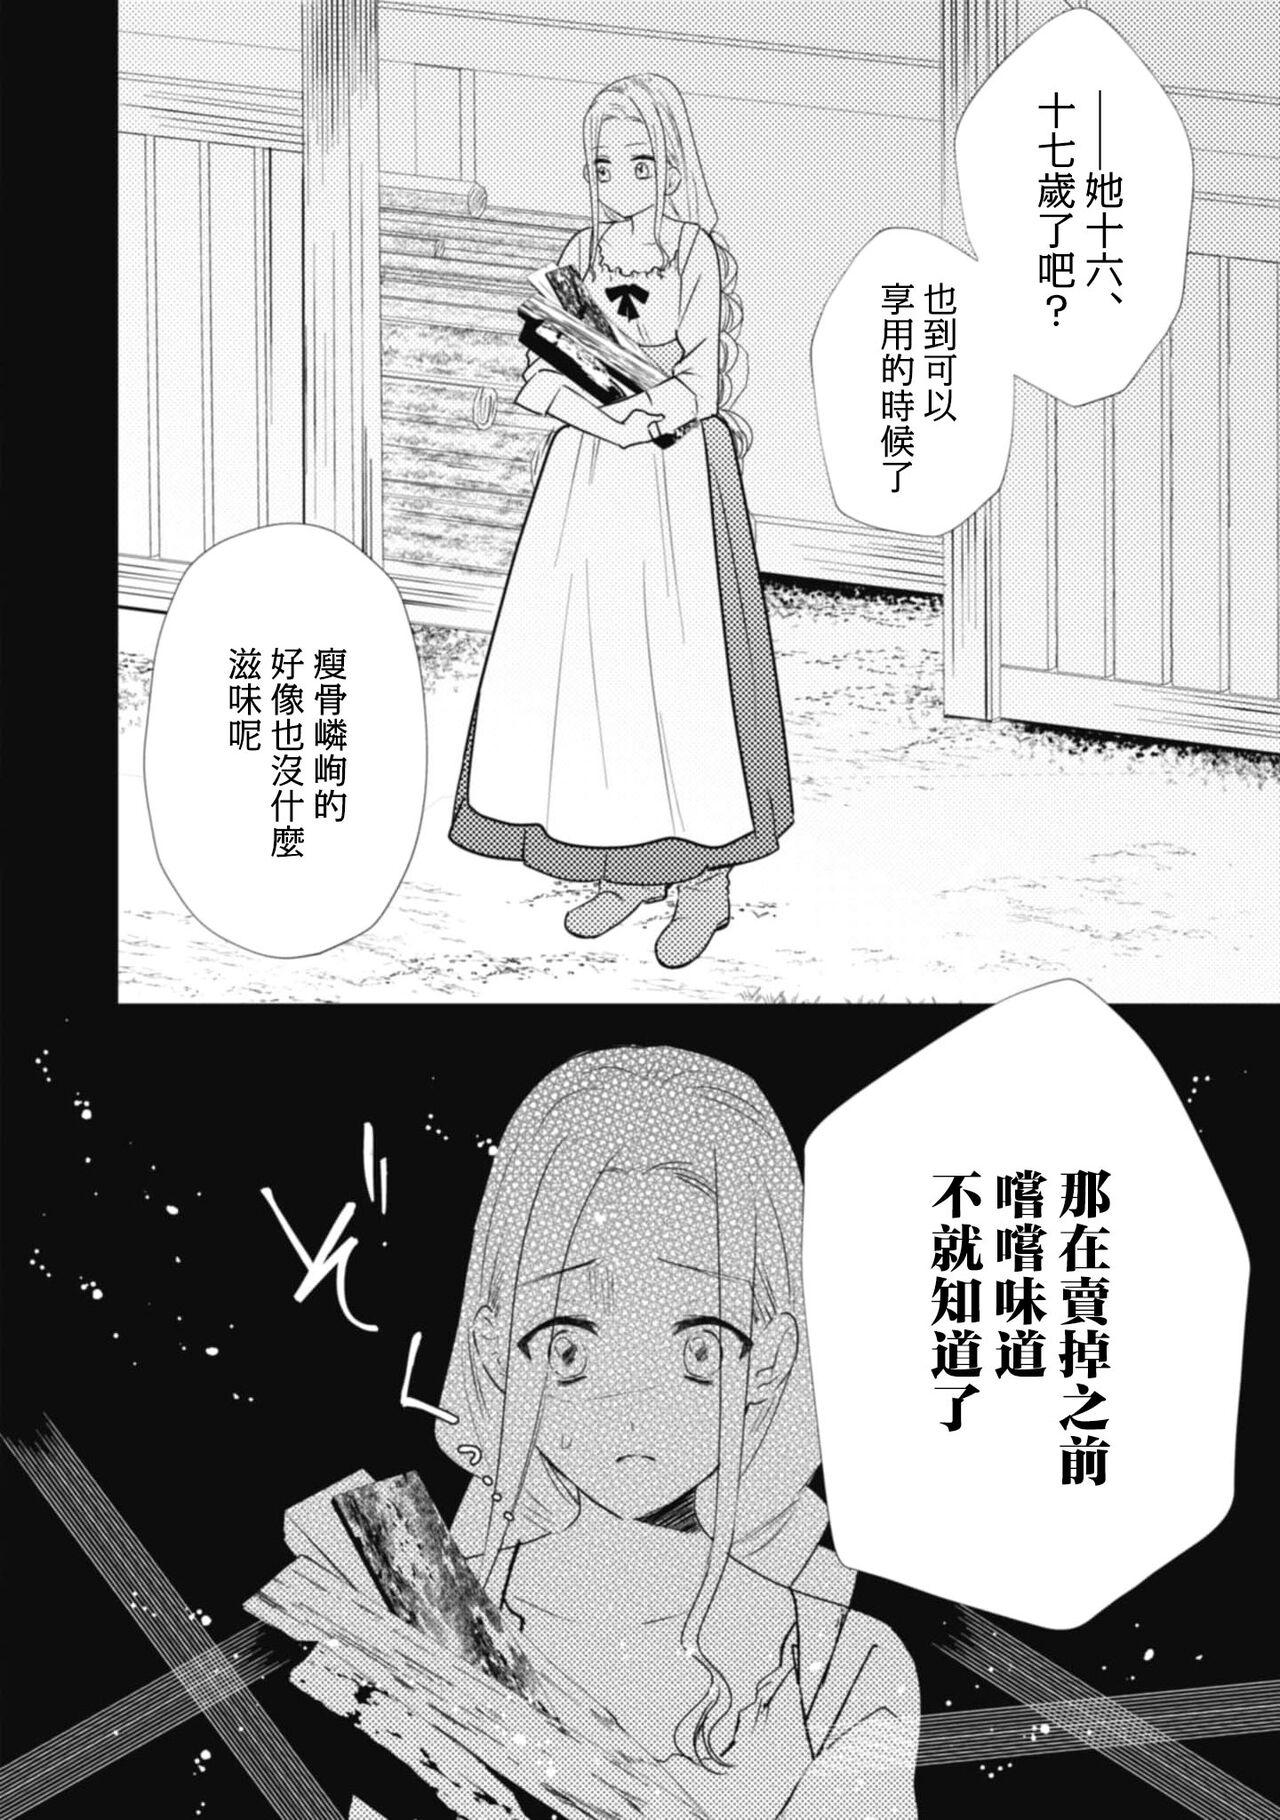 A shepherd in love with a demoted knight | 与被贬骑士相爱的牧羊女1 16